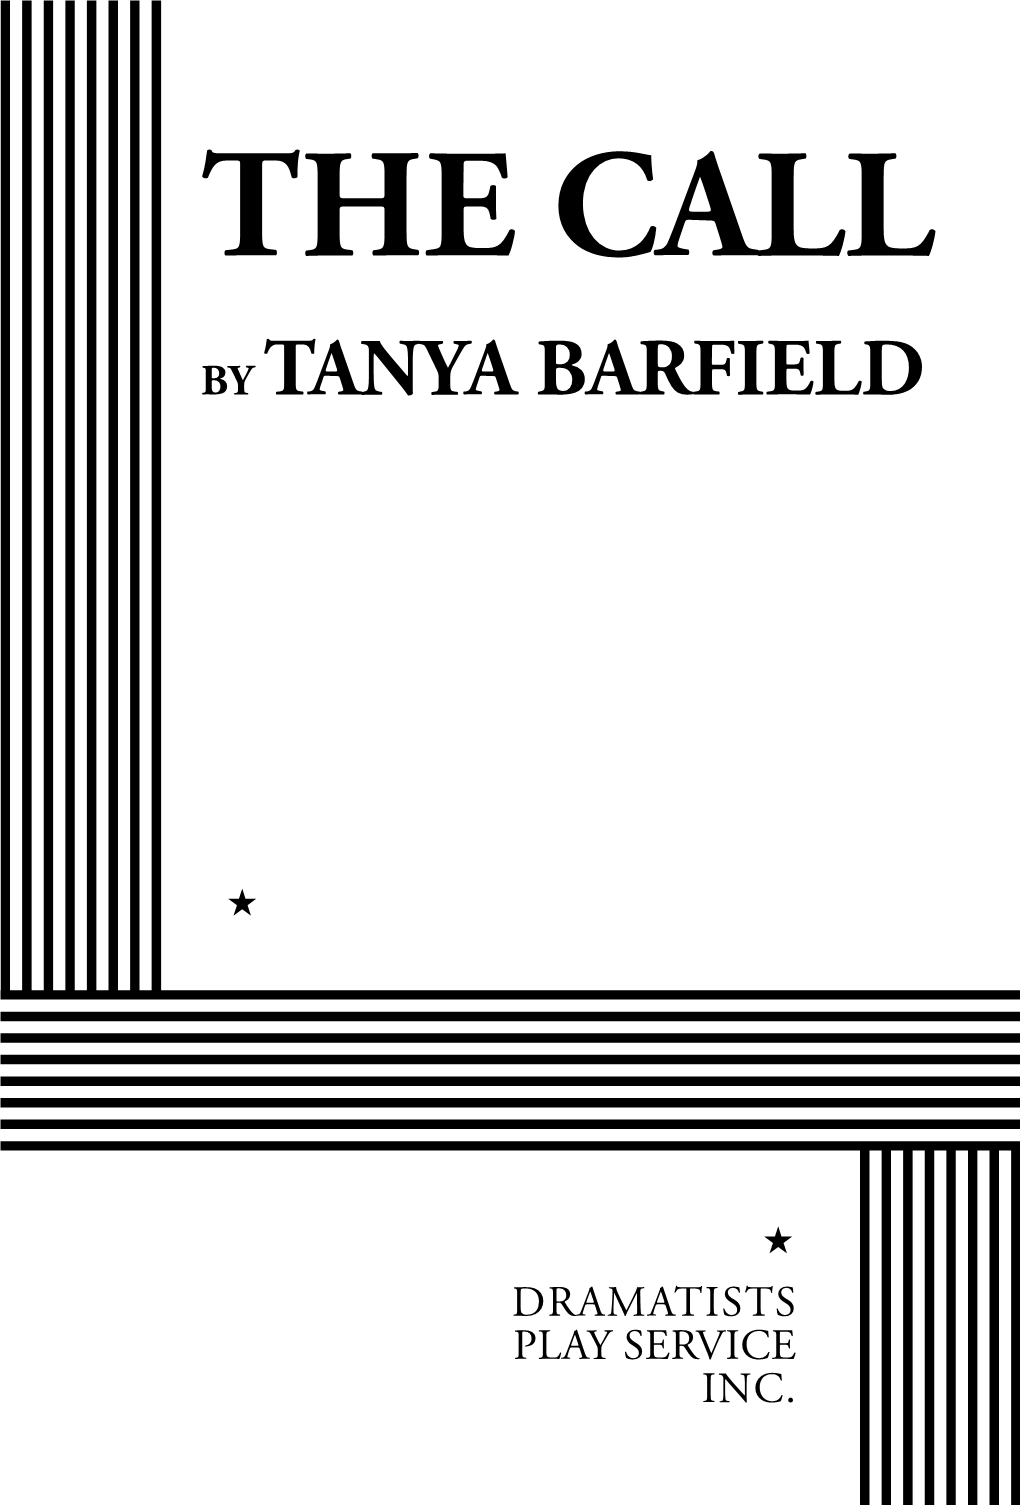 THE CALL by Tanya Barfield